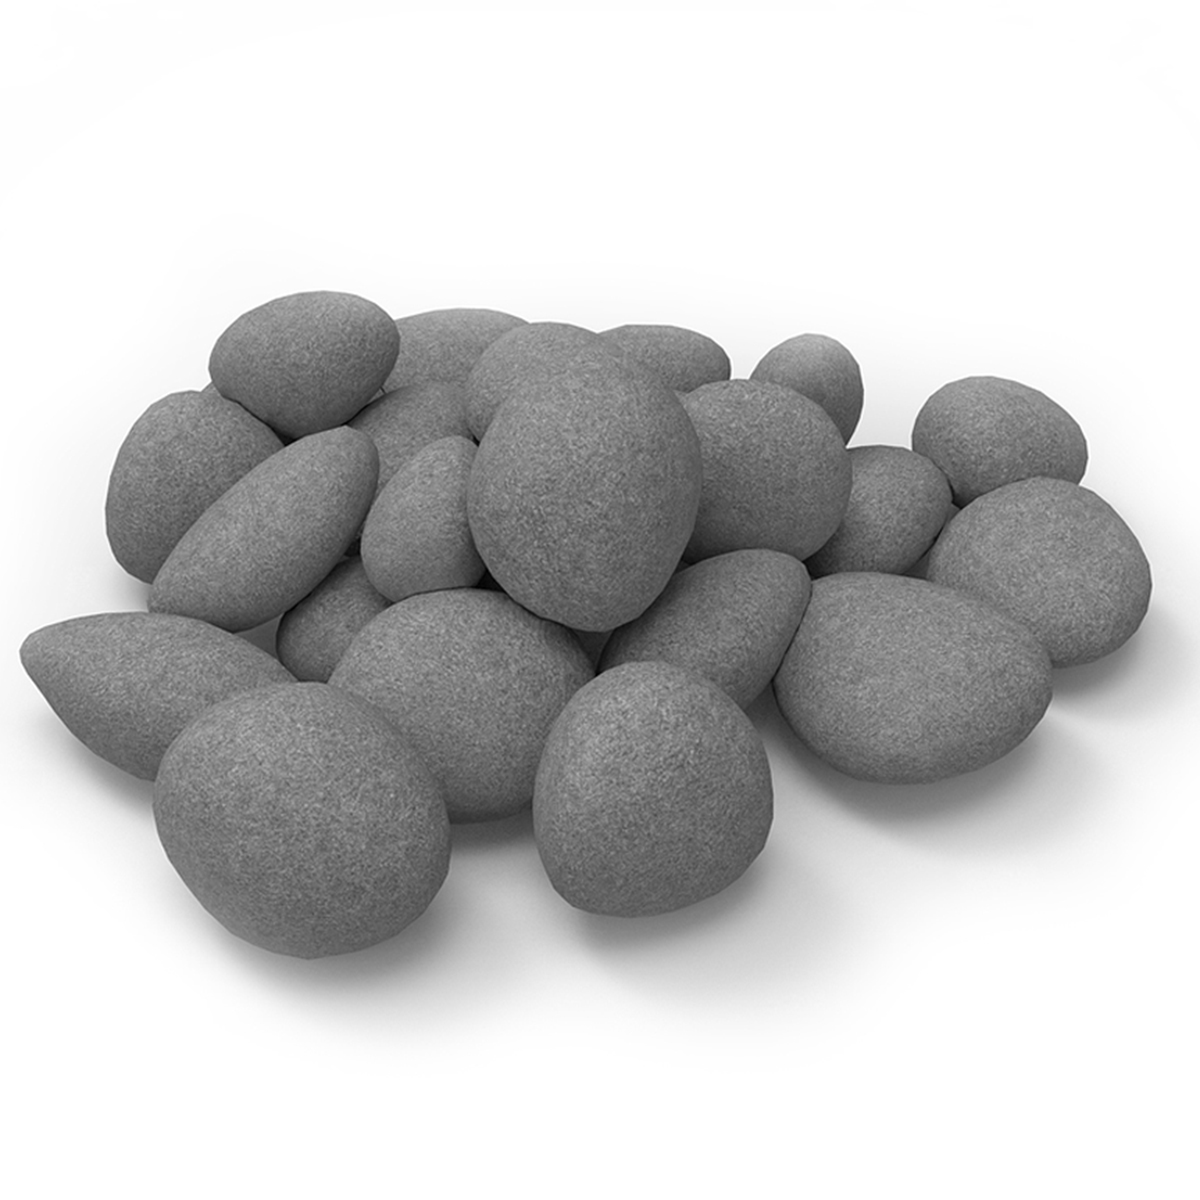 Regal Flame RFA1000GR Light Weight Ceramic Fiber Gas Ethanol Electric Fireplace Pebbles in Gray - Set of 24